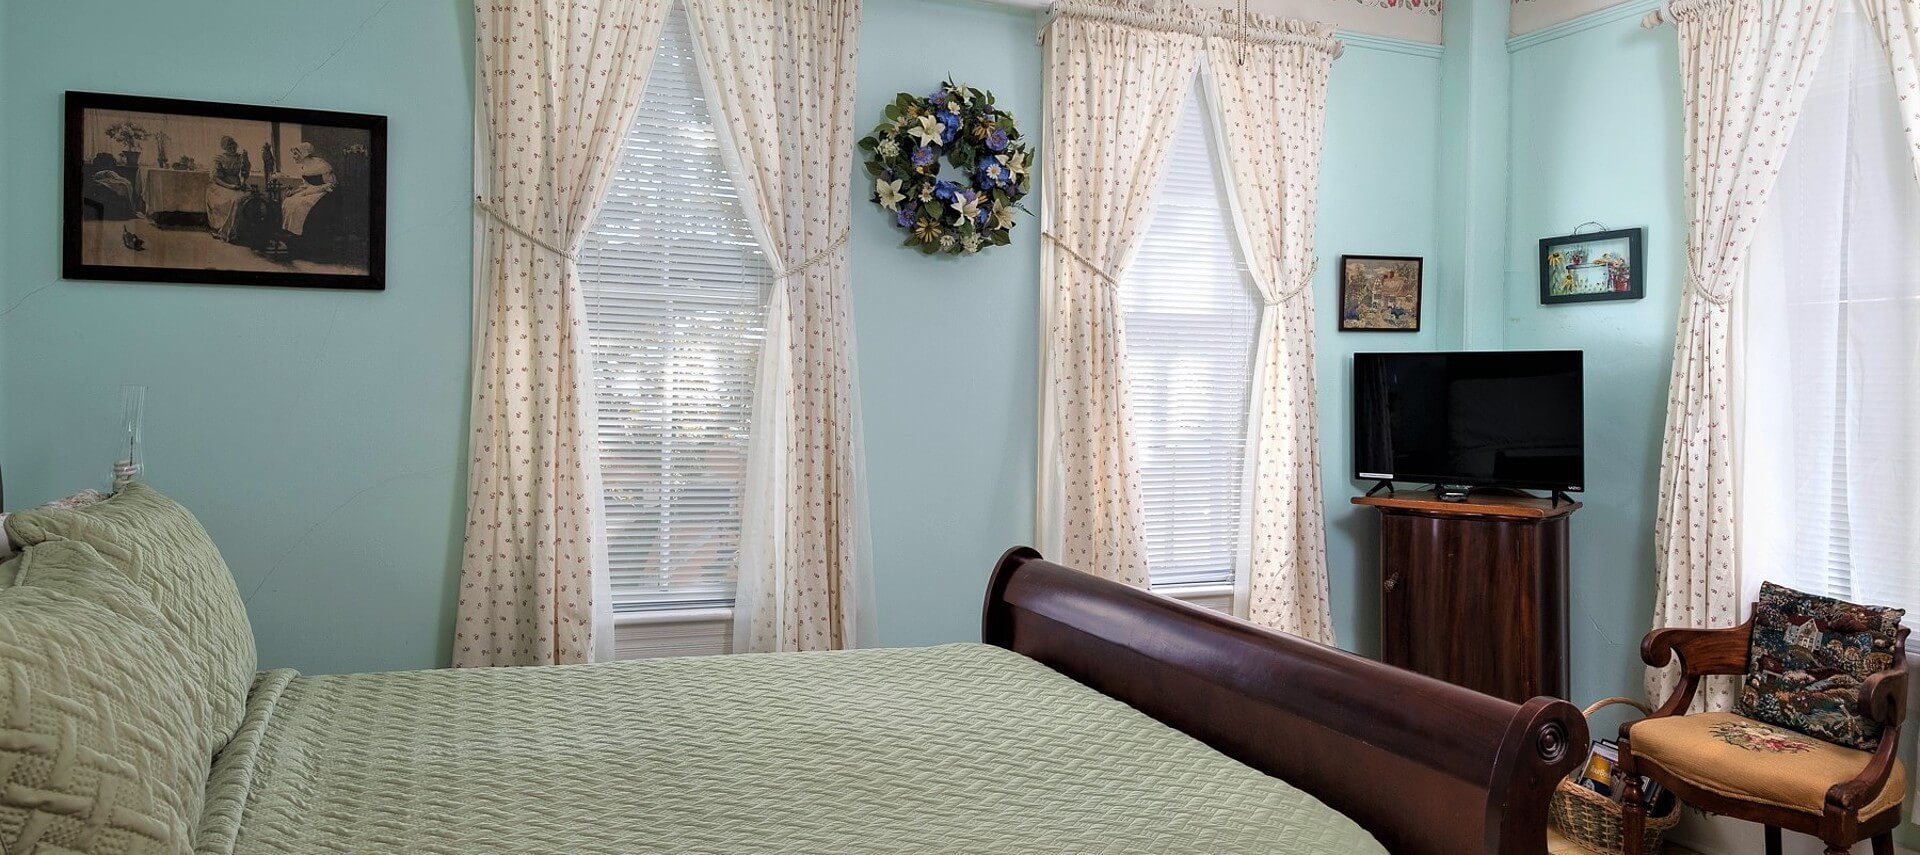 Guestroom with sleigh bed, large windows with floral curtains and sitting chair